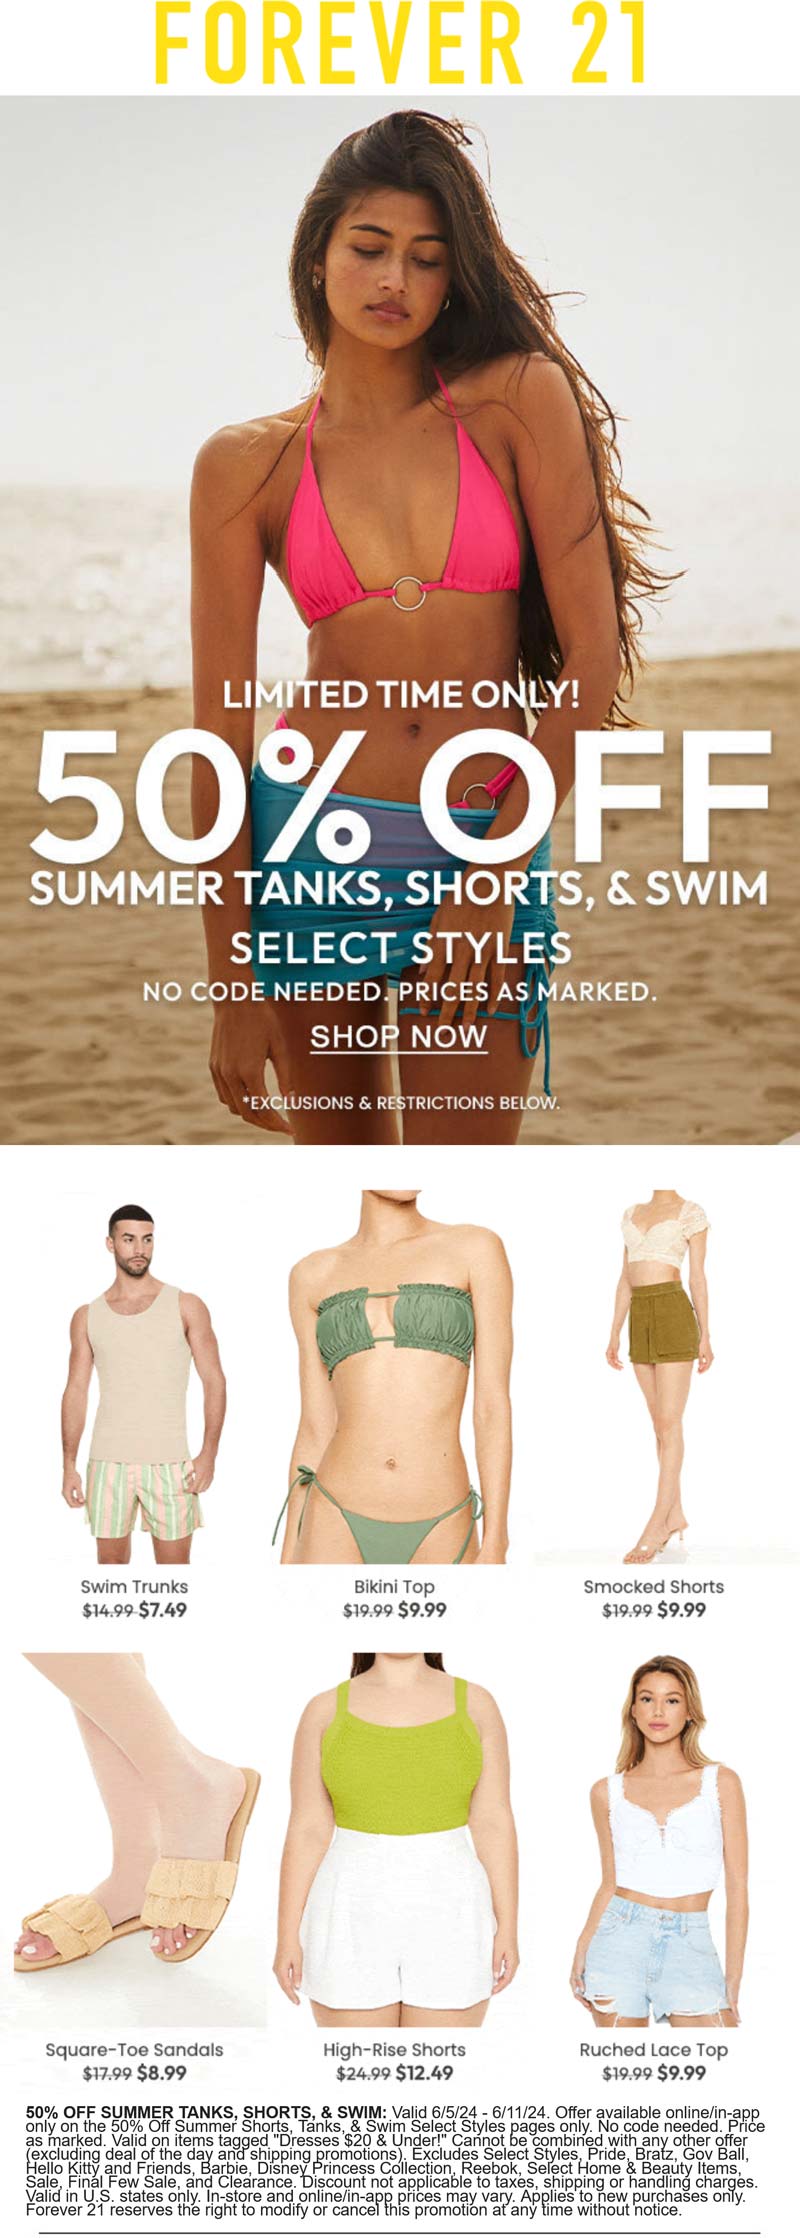 Forever 21 stores Coupon  50% off summer gear online at Forever 21 #forever21 